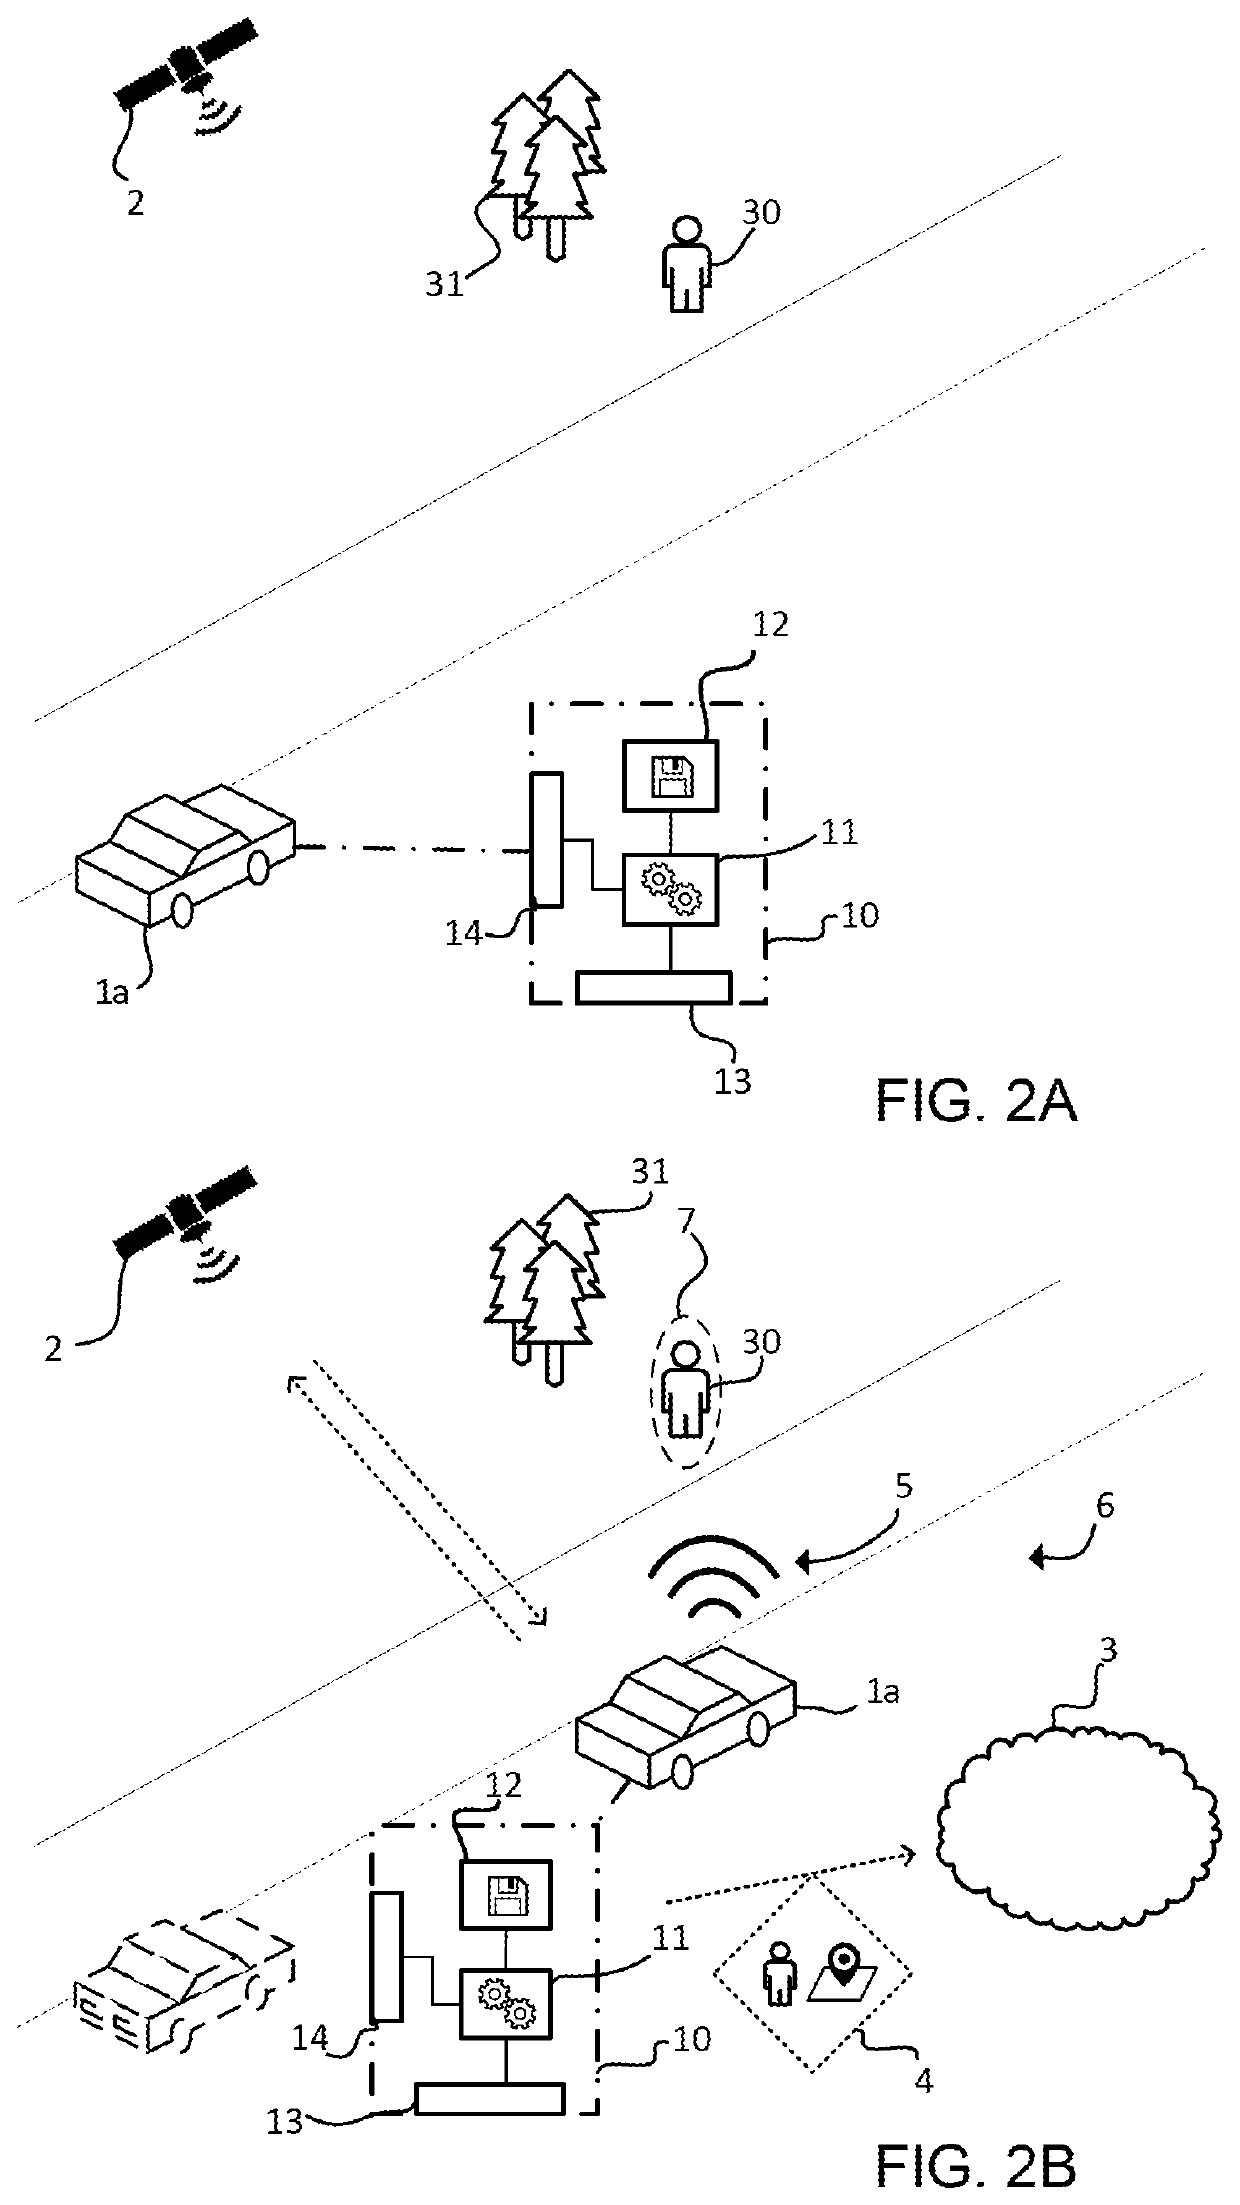 Control of activation threshold for vehicle safety systems